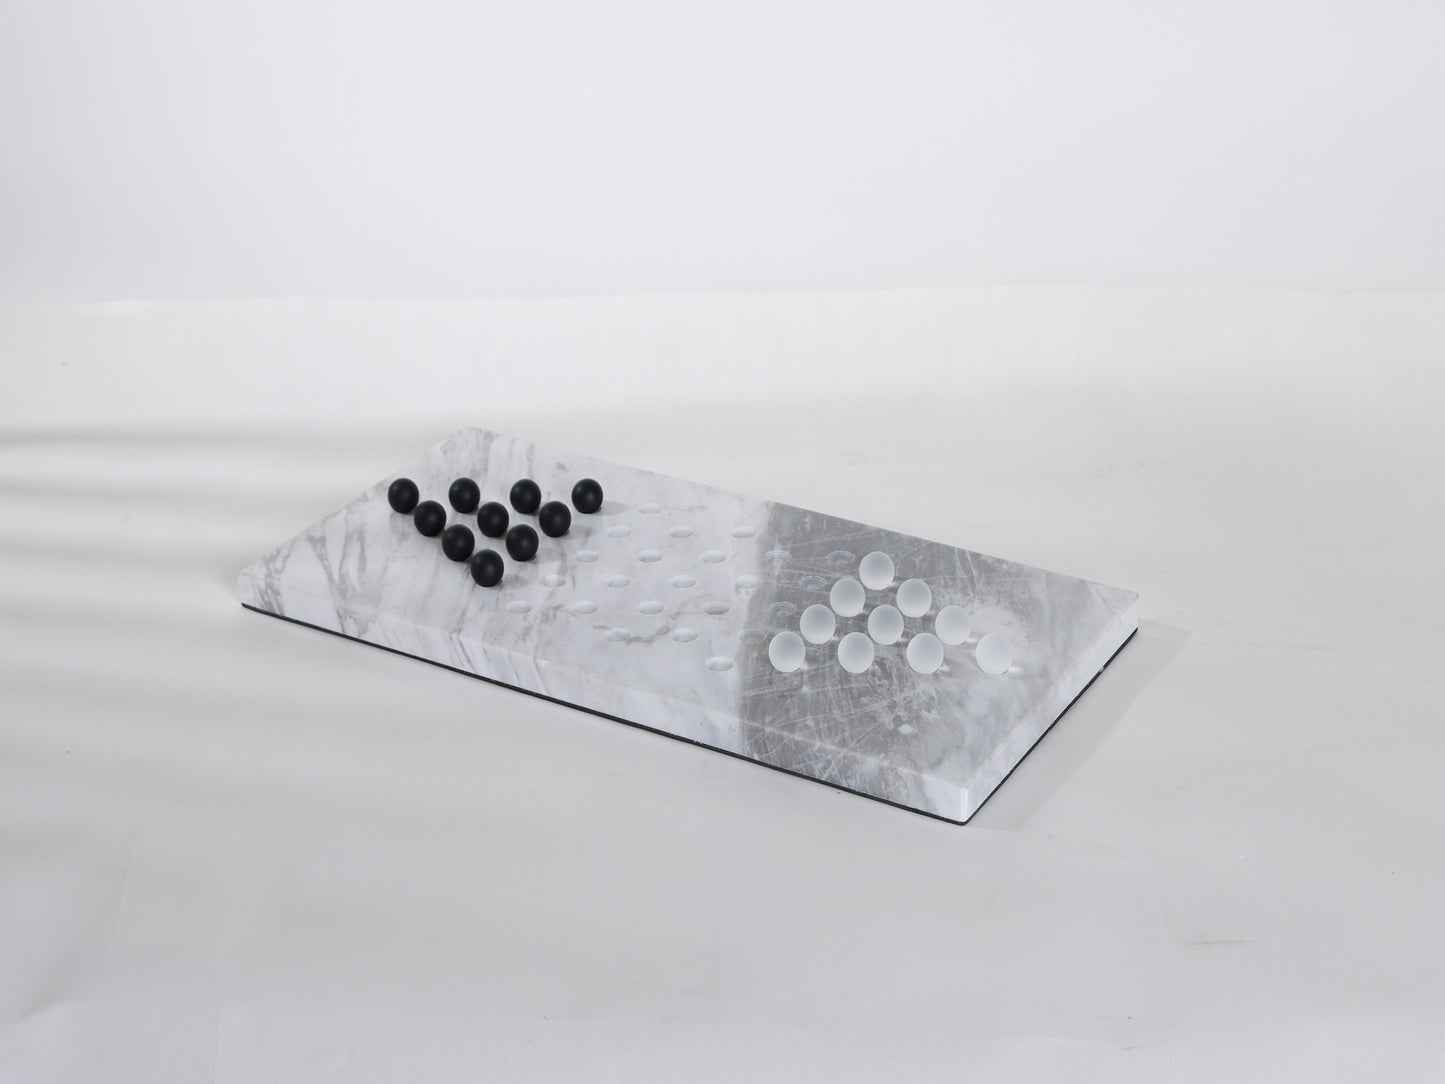 MARBLE CHESSBOARD DECORATION